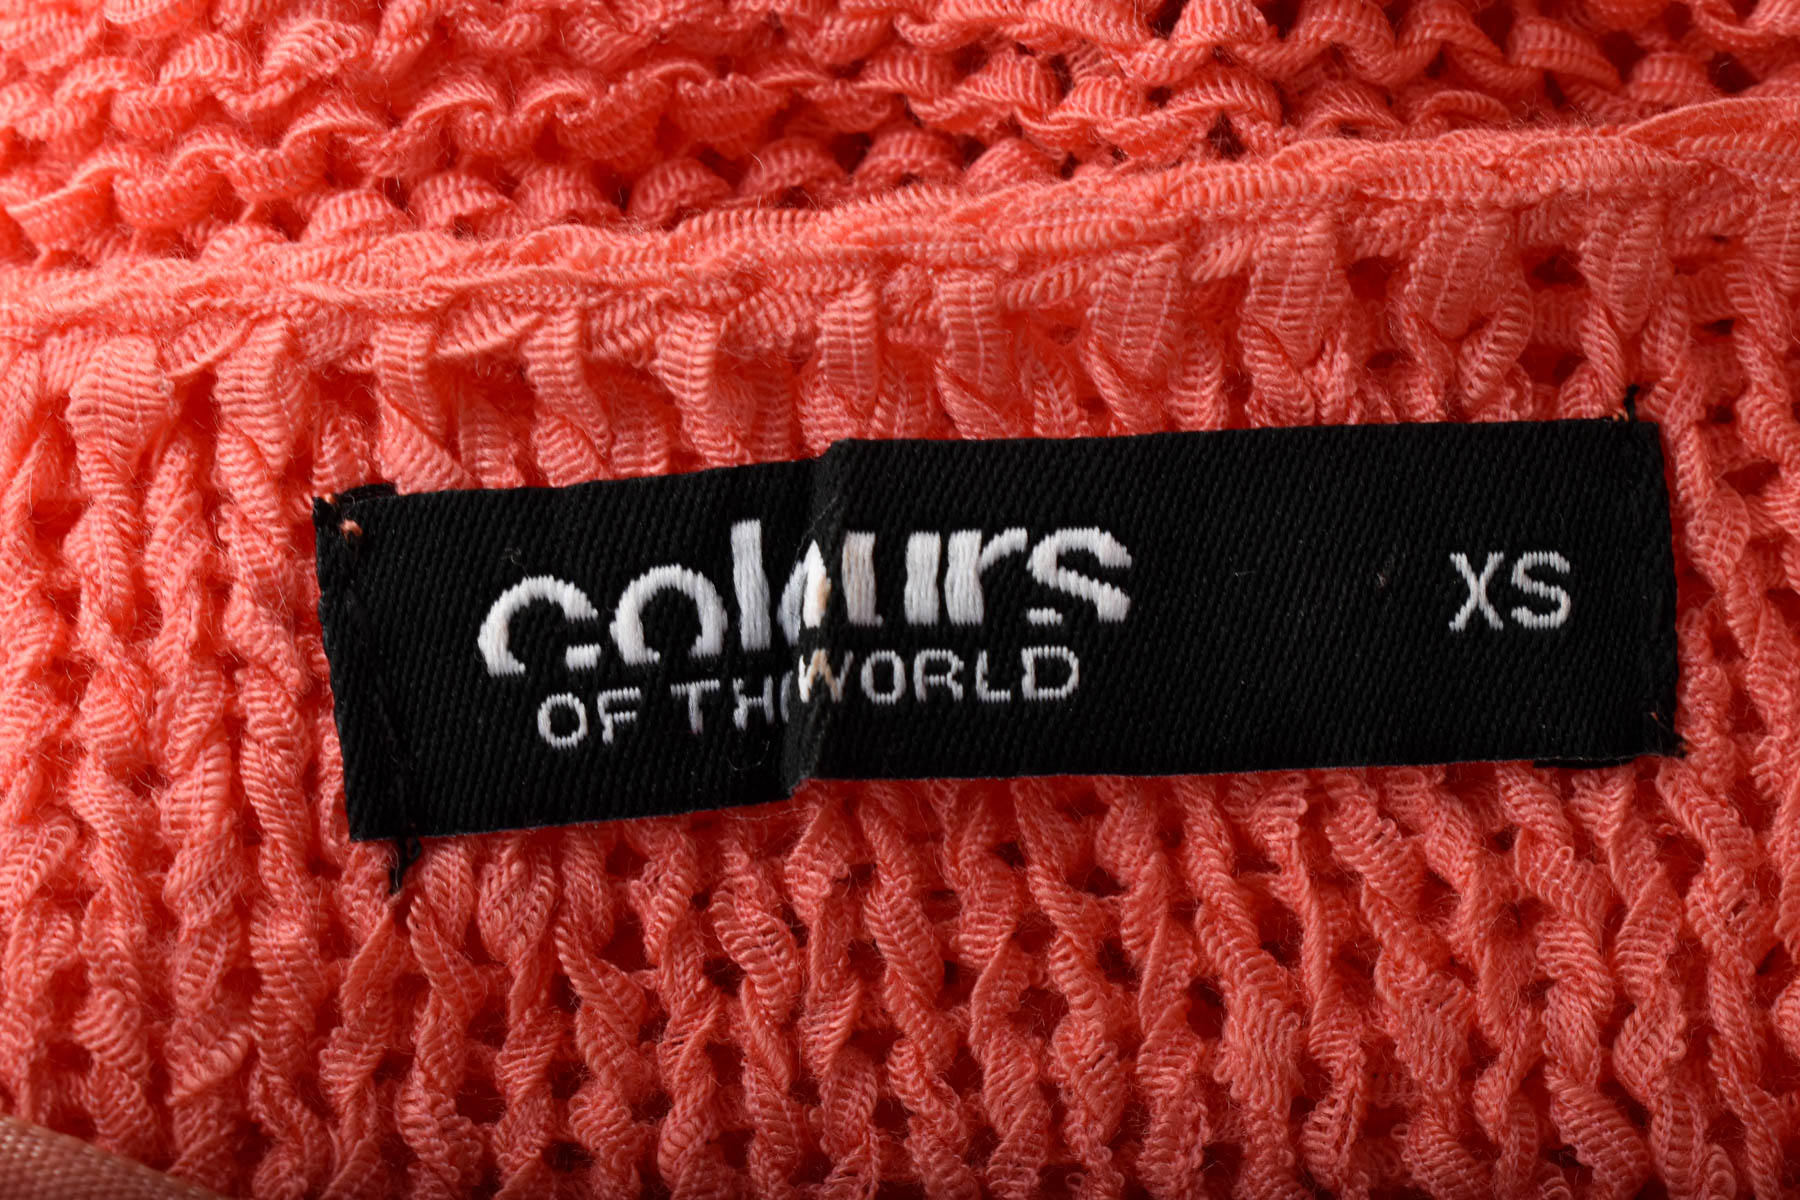 Sweter damski - Colours of the world - 2